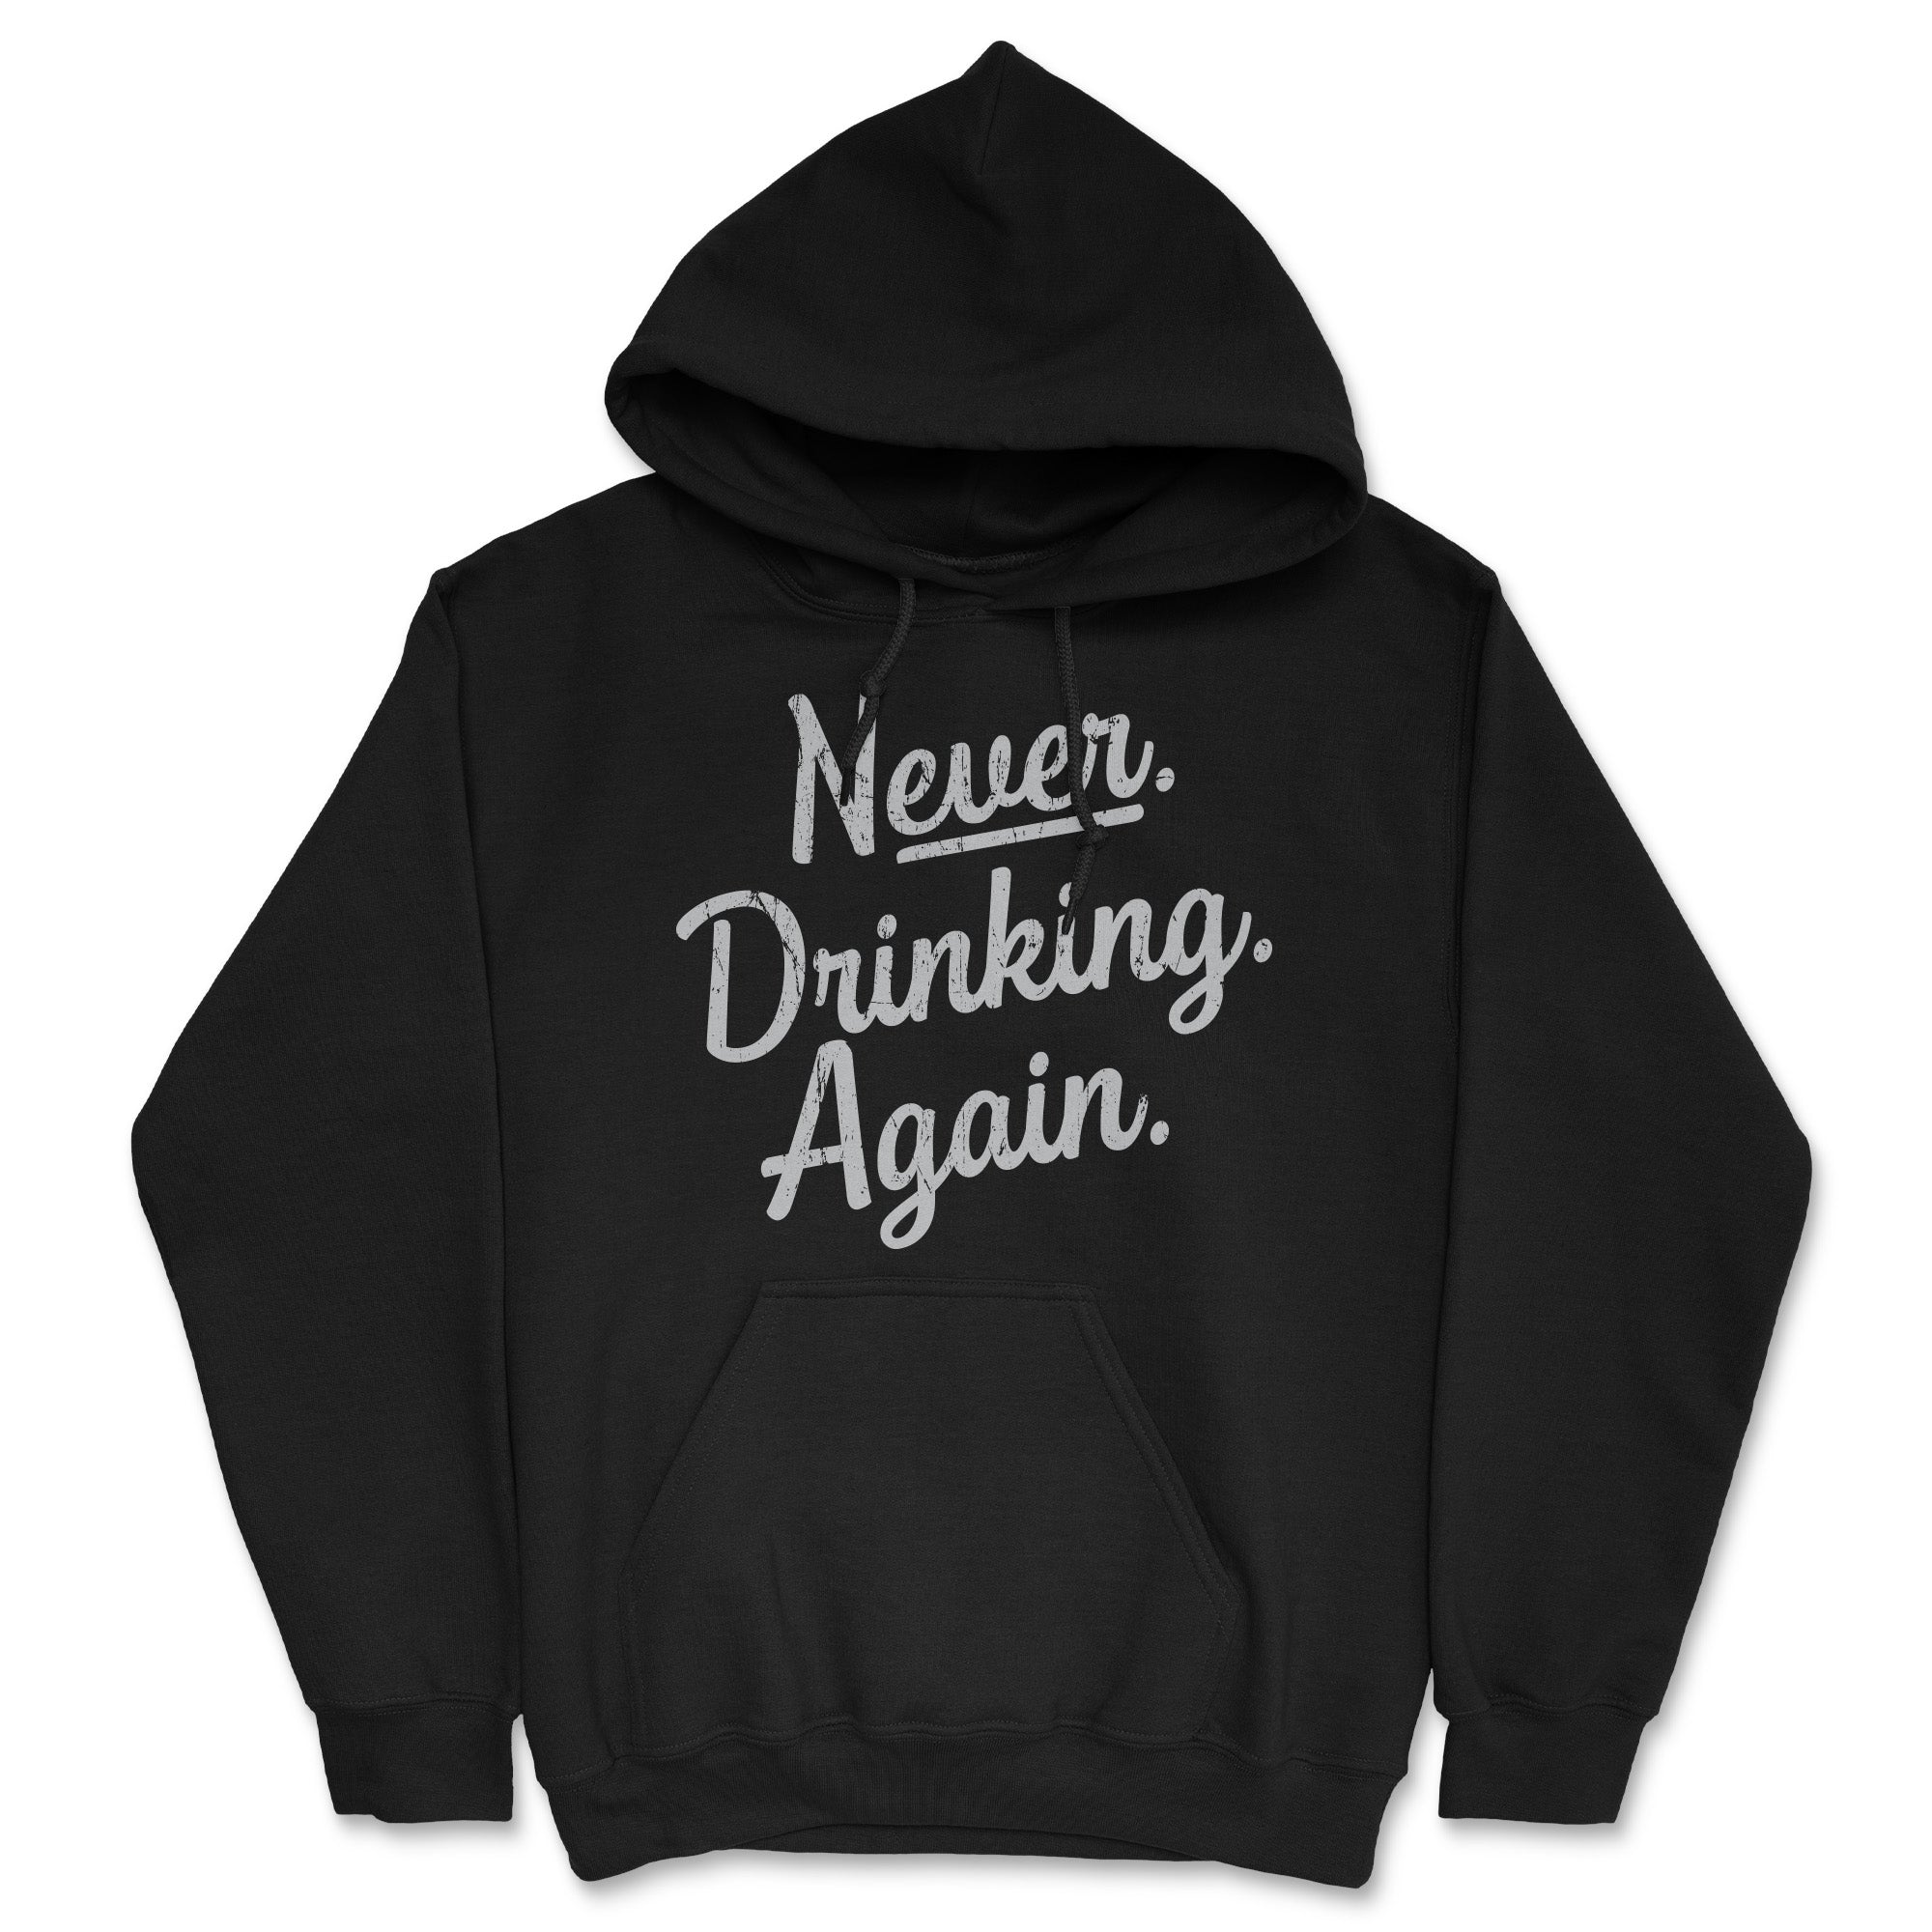 Funny Heather Black - NEVER Never Drinking Again Hoodie Nerdy Drinking sarcastic Tee